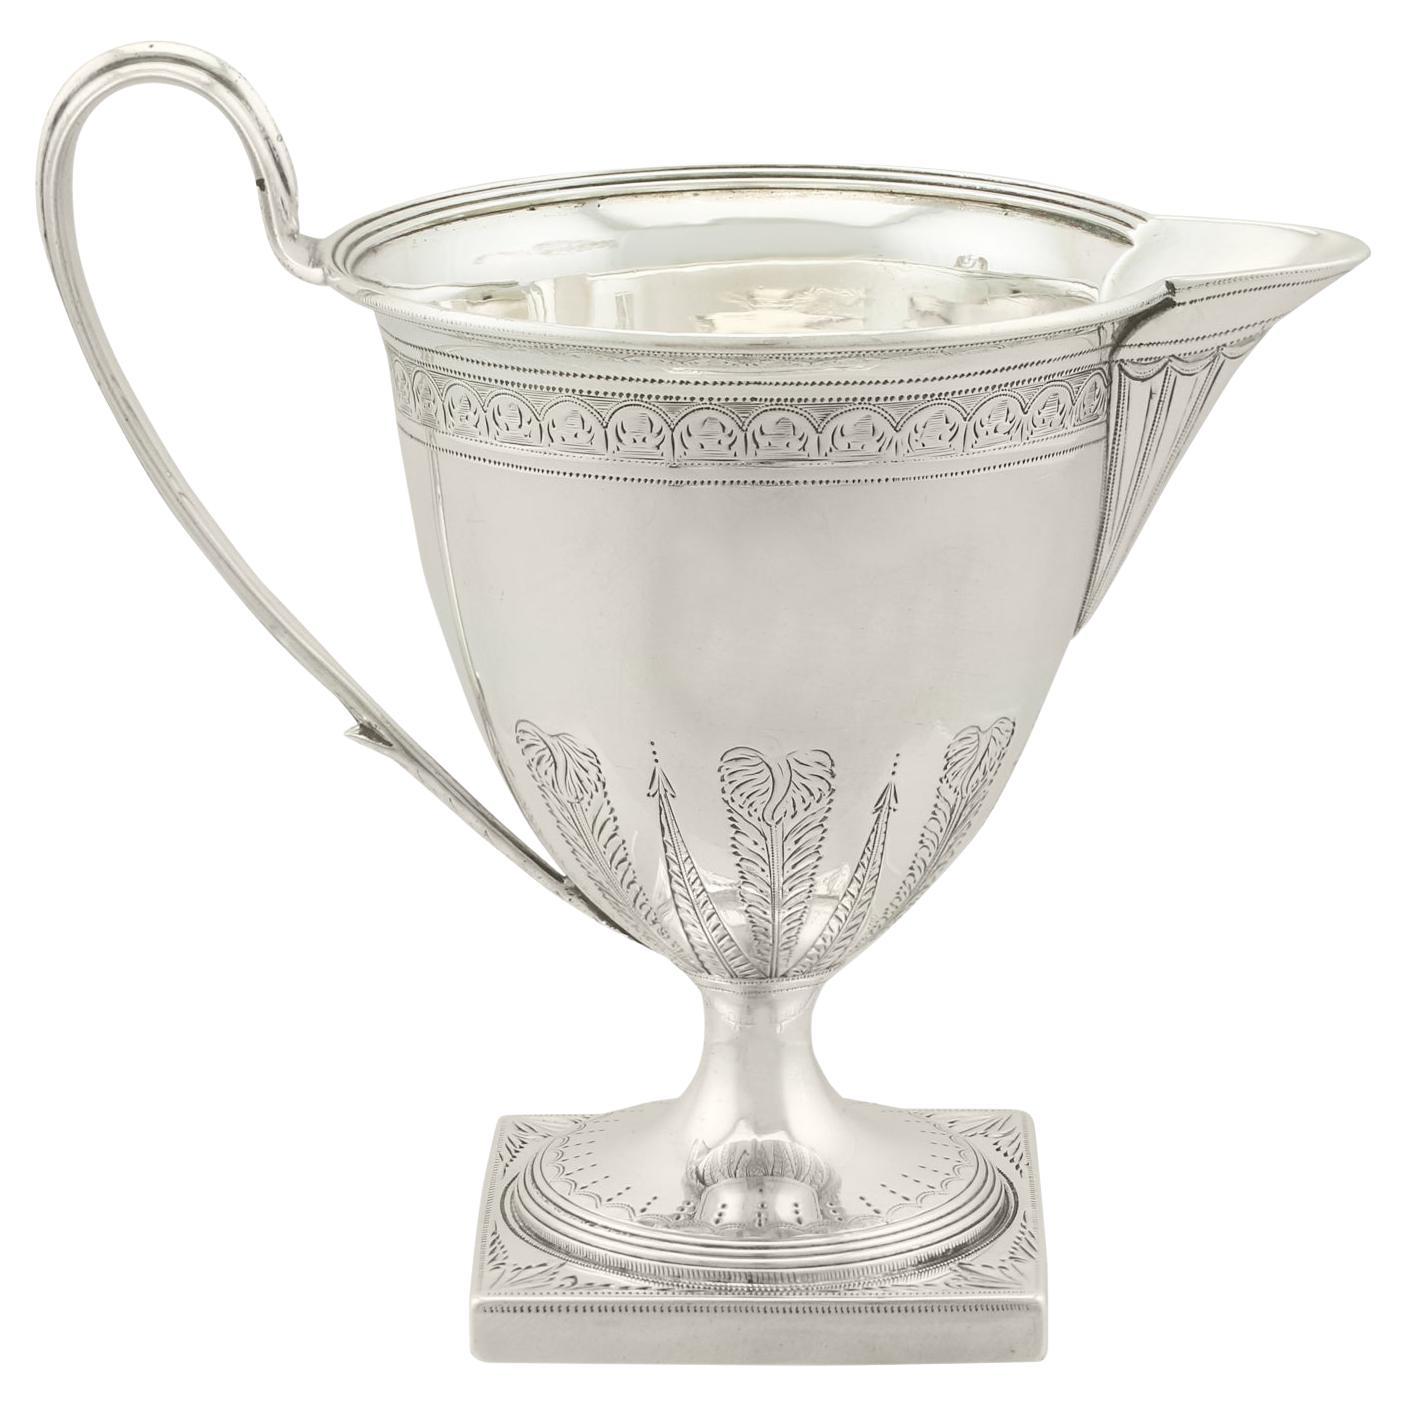 Antique George III Sterling Silver Cream Jug by Henry Chawner, '1794'